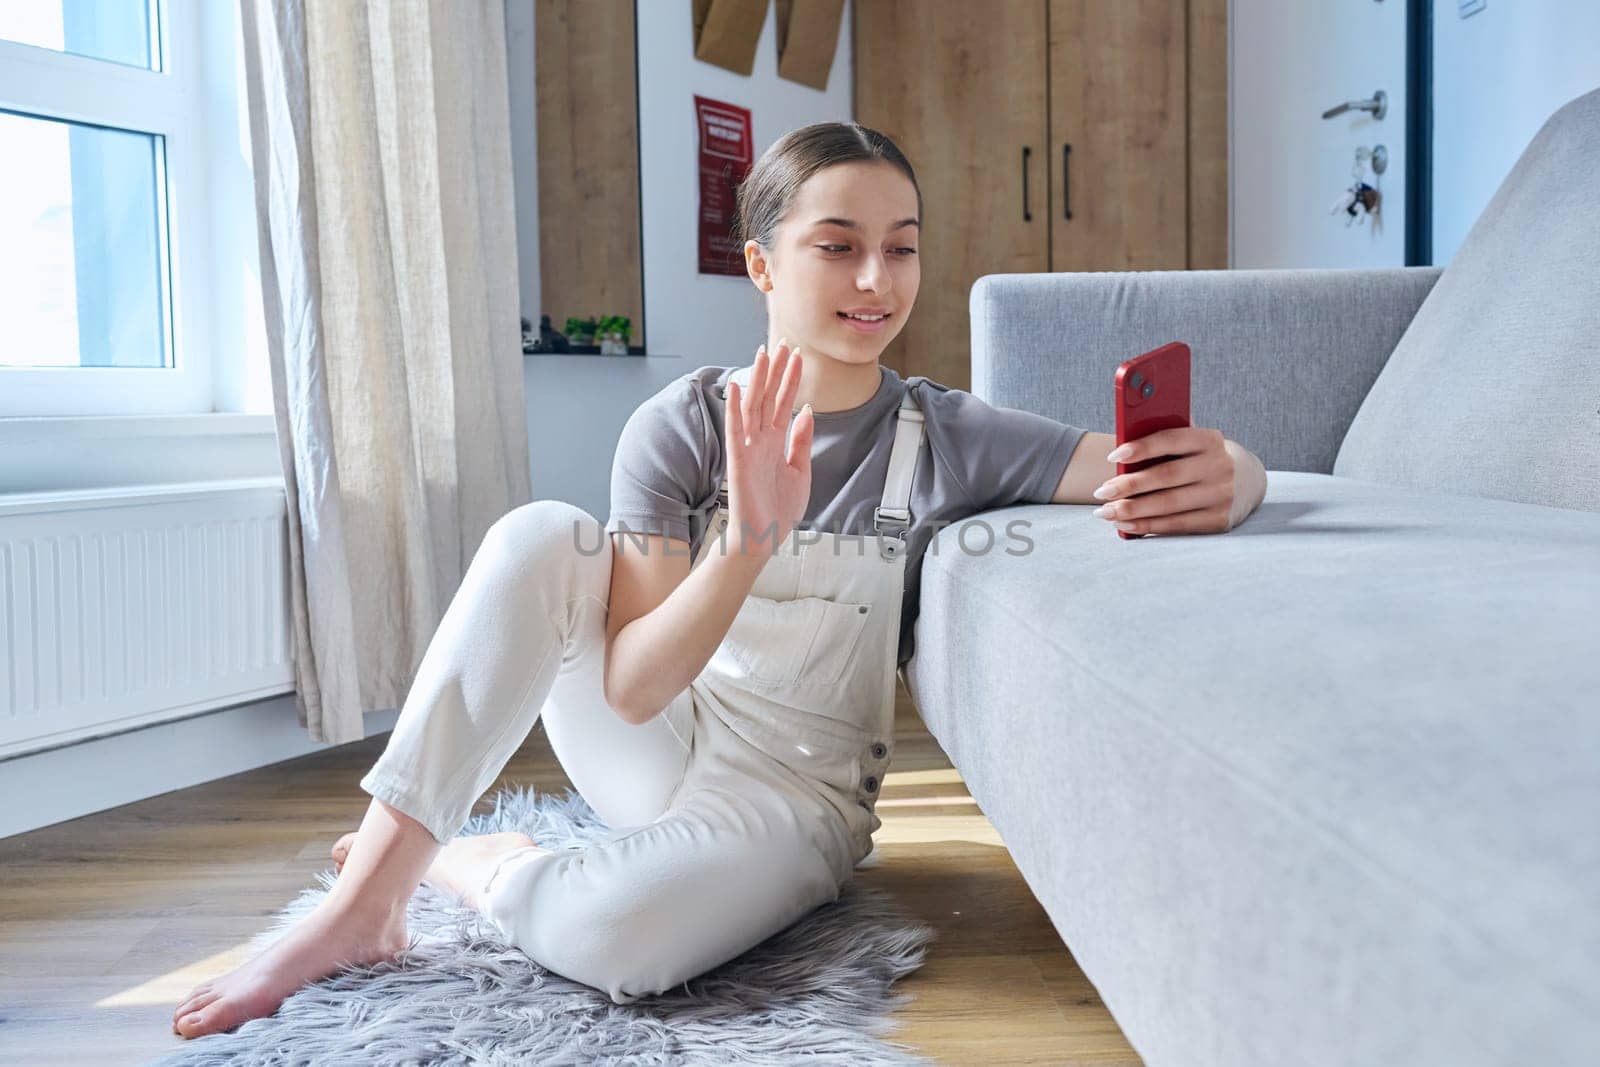 Teenager girl sitting at home on floor near sofa using smartphone for video call conference, waving hand at phone screen. Technology for learning leisure communication, modern lifestyle, adolescence